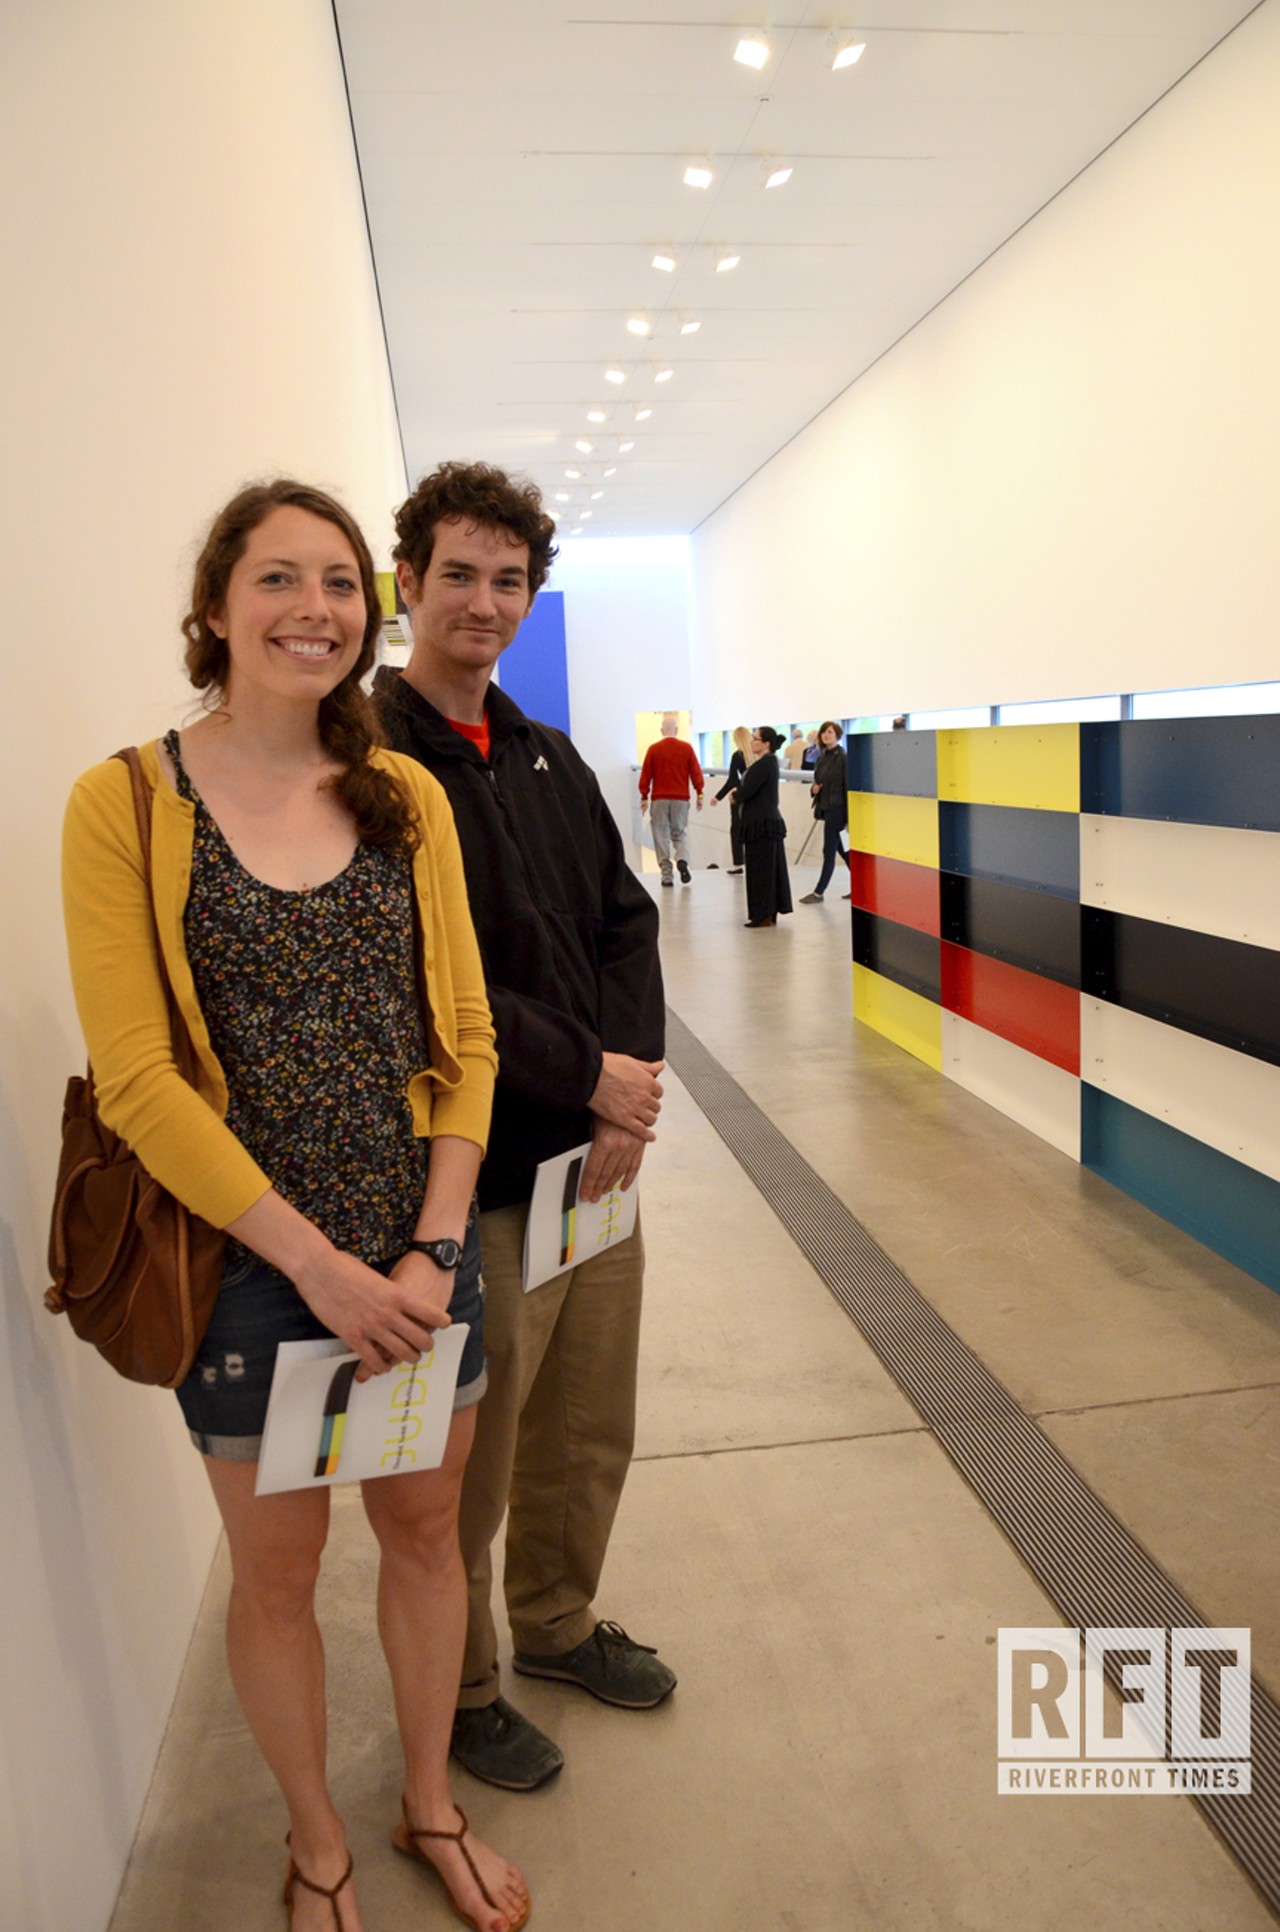 Donald Judd: The Multicolored Works Opening Reception